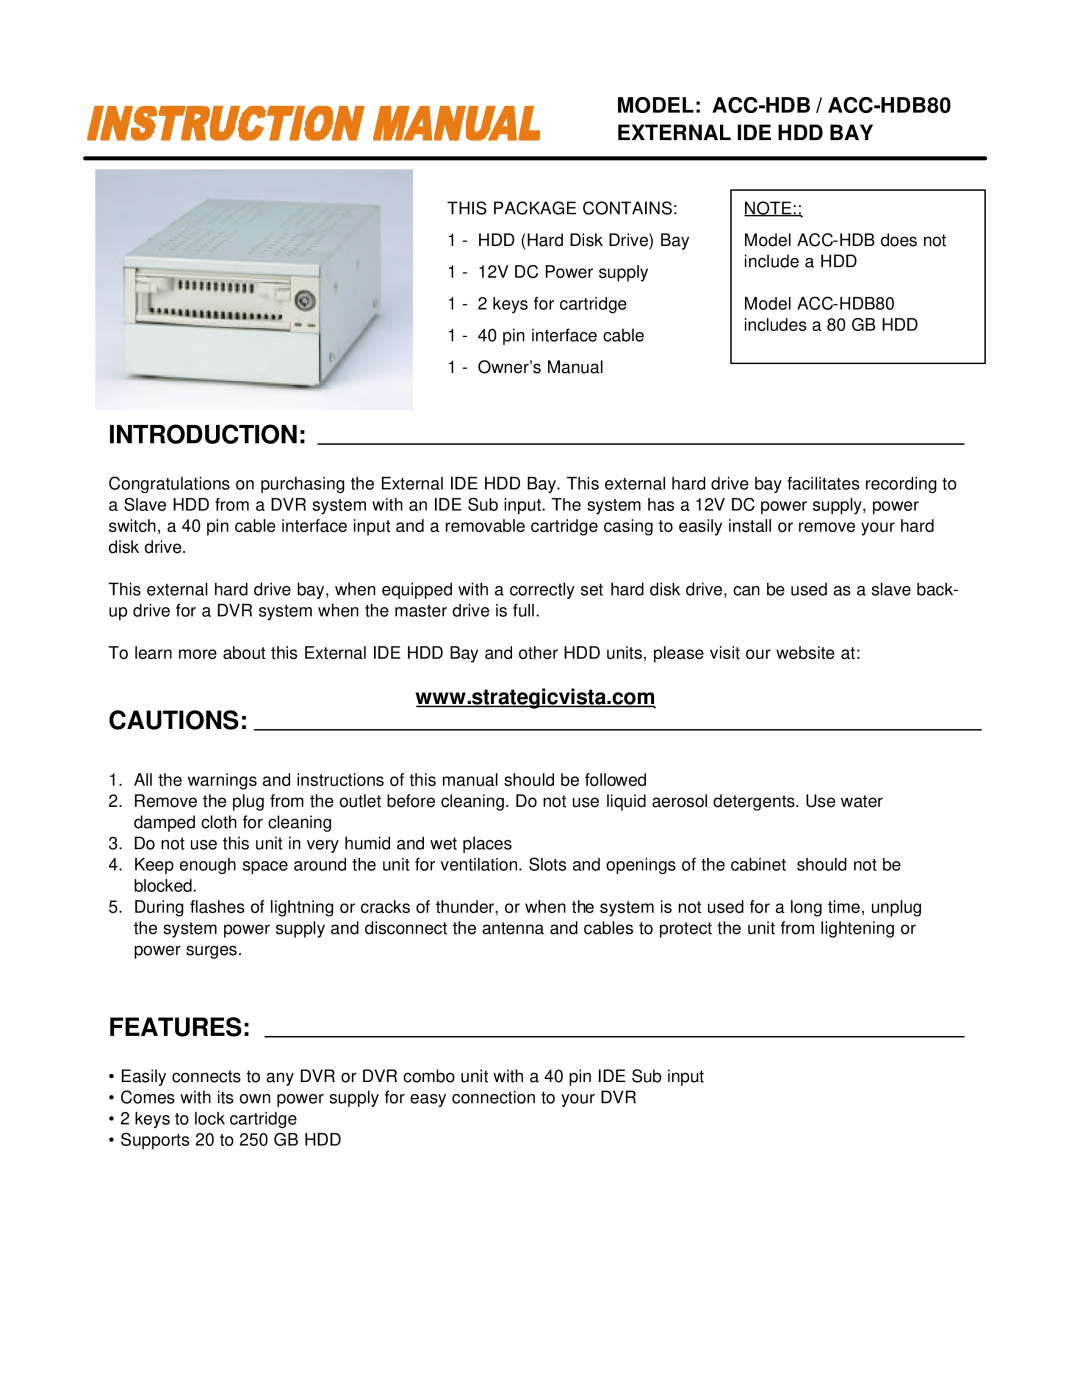 LOREX Technology owner manual Introduction, Cautions, Features, MODEL ACC-HDB / ACC-HDB80 EXTERNAL IDE HDD BAY 